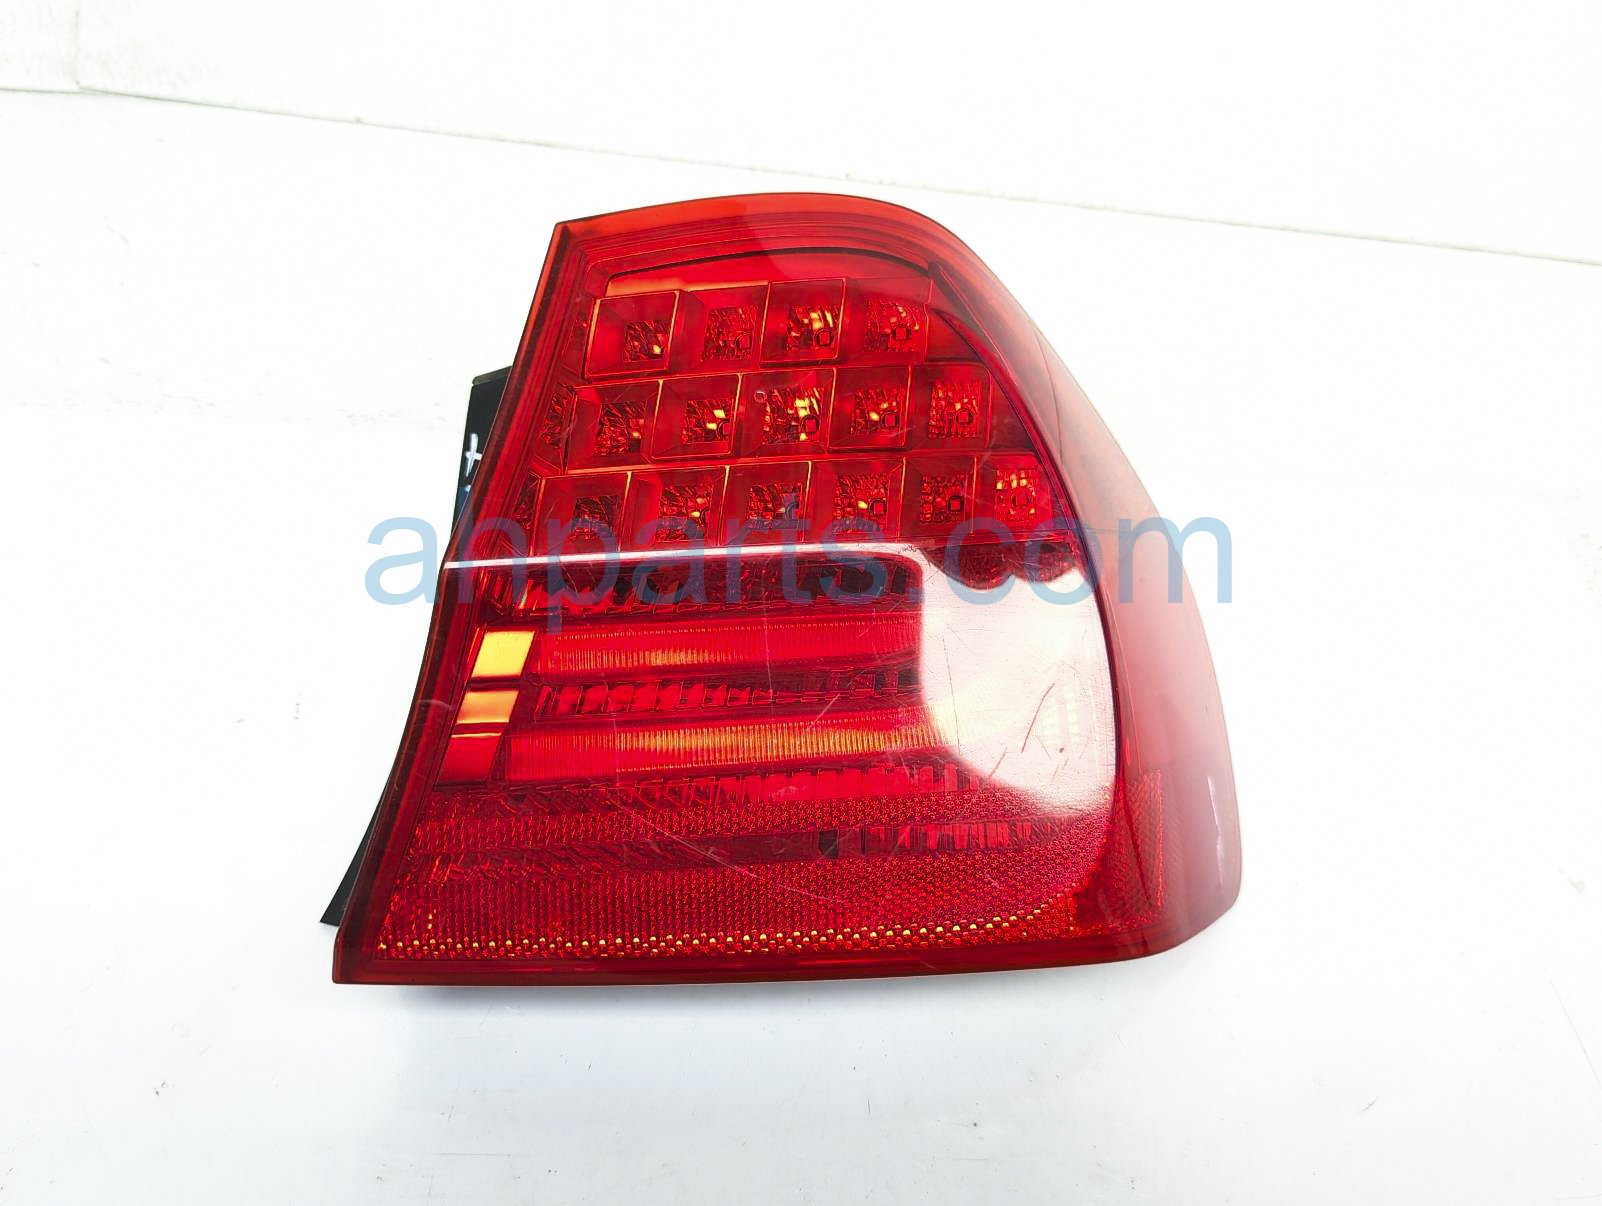 $70 BMW RH TAIL LAMP (ON BODY) - NOTES